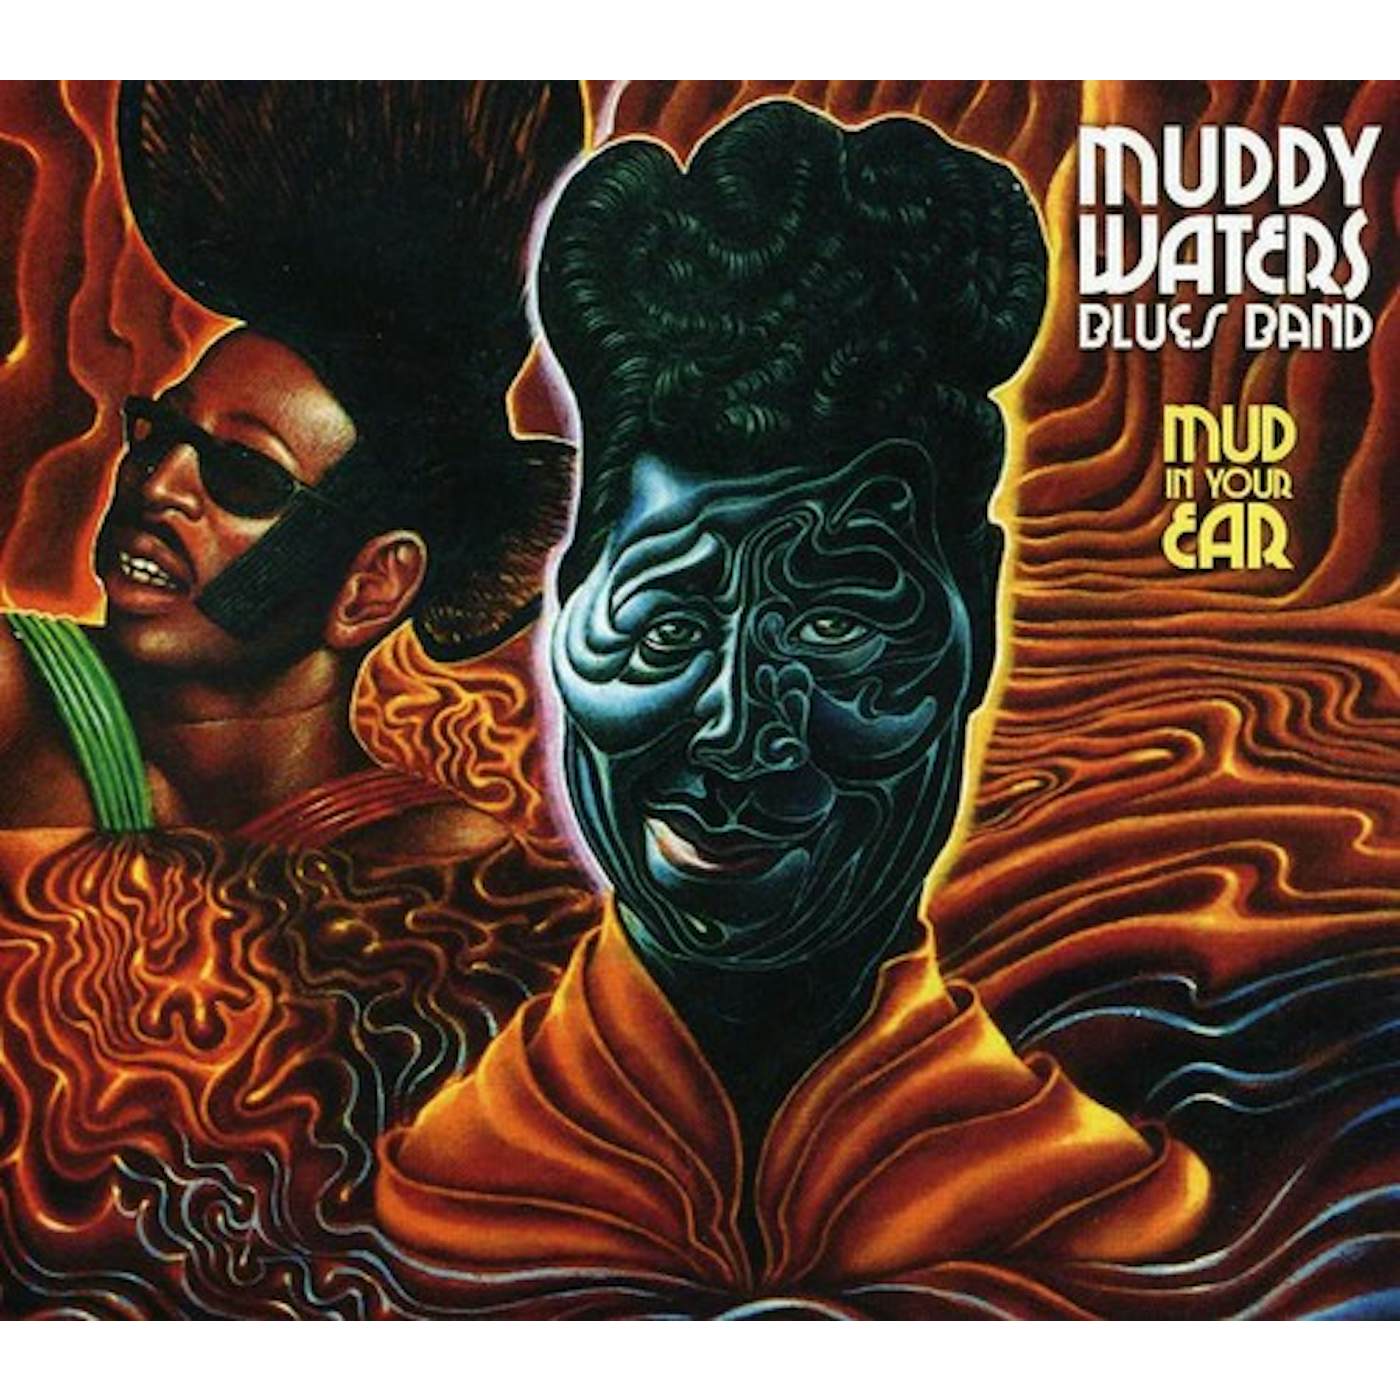 Muddy Waters Blues Band MUD IN YOUR EAR CD